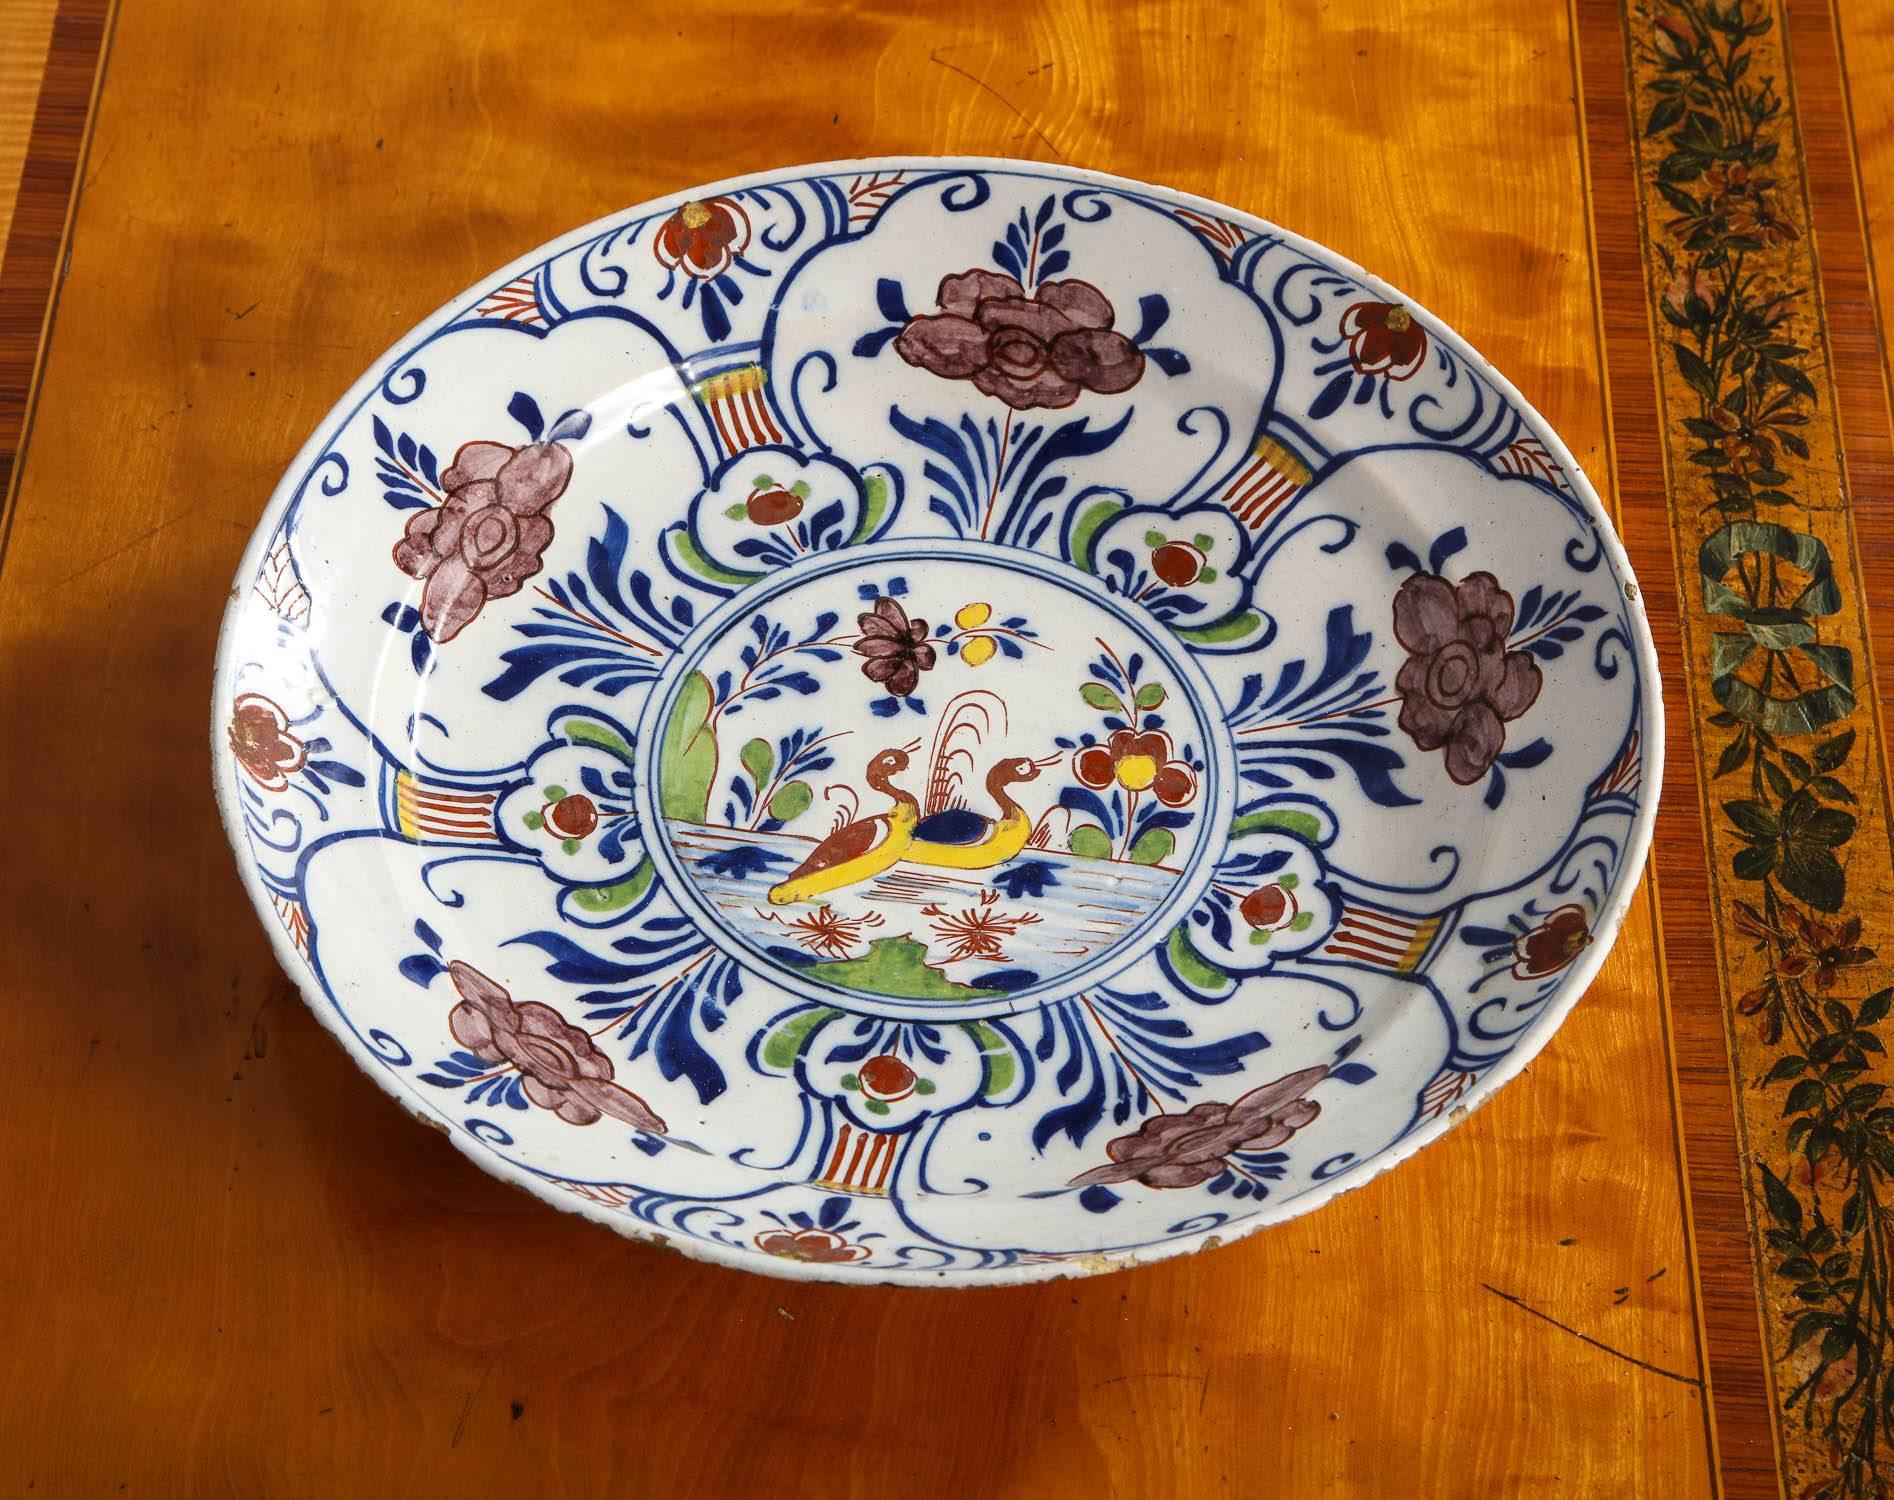 Fine 18th century Dutch delft charger/deep dish featuring two ducks in a pond with foliate decorated border, in manganese, yellow, blue and green glazes, having pottery mark 